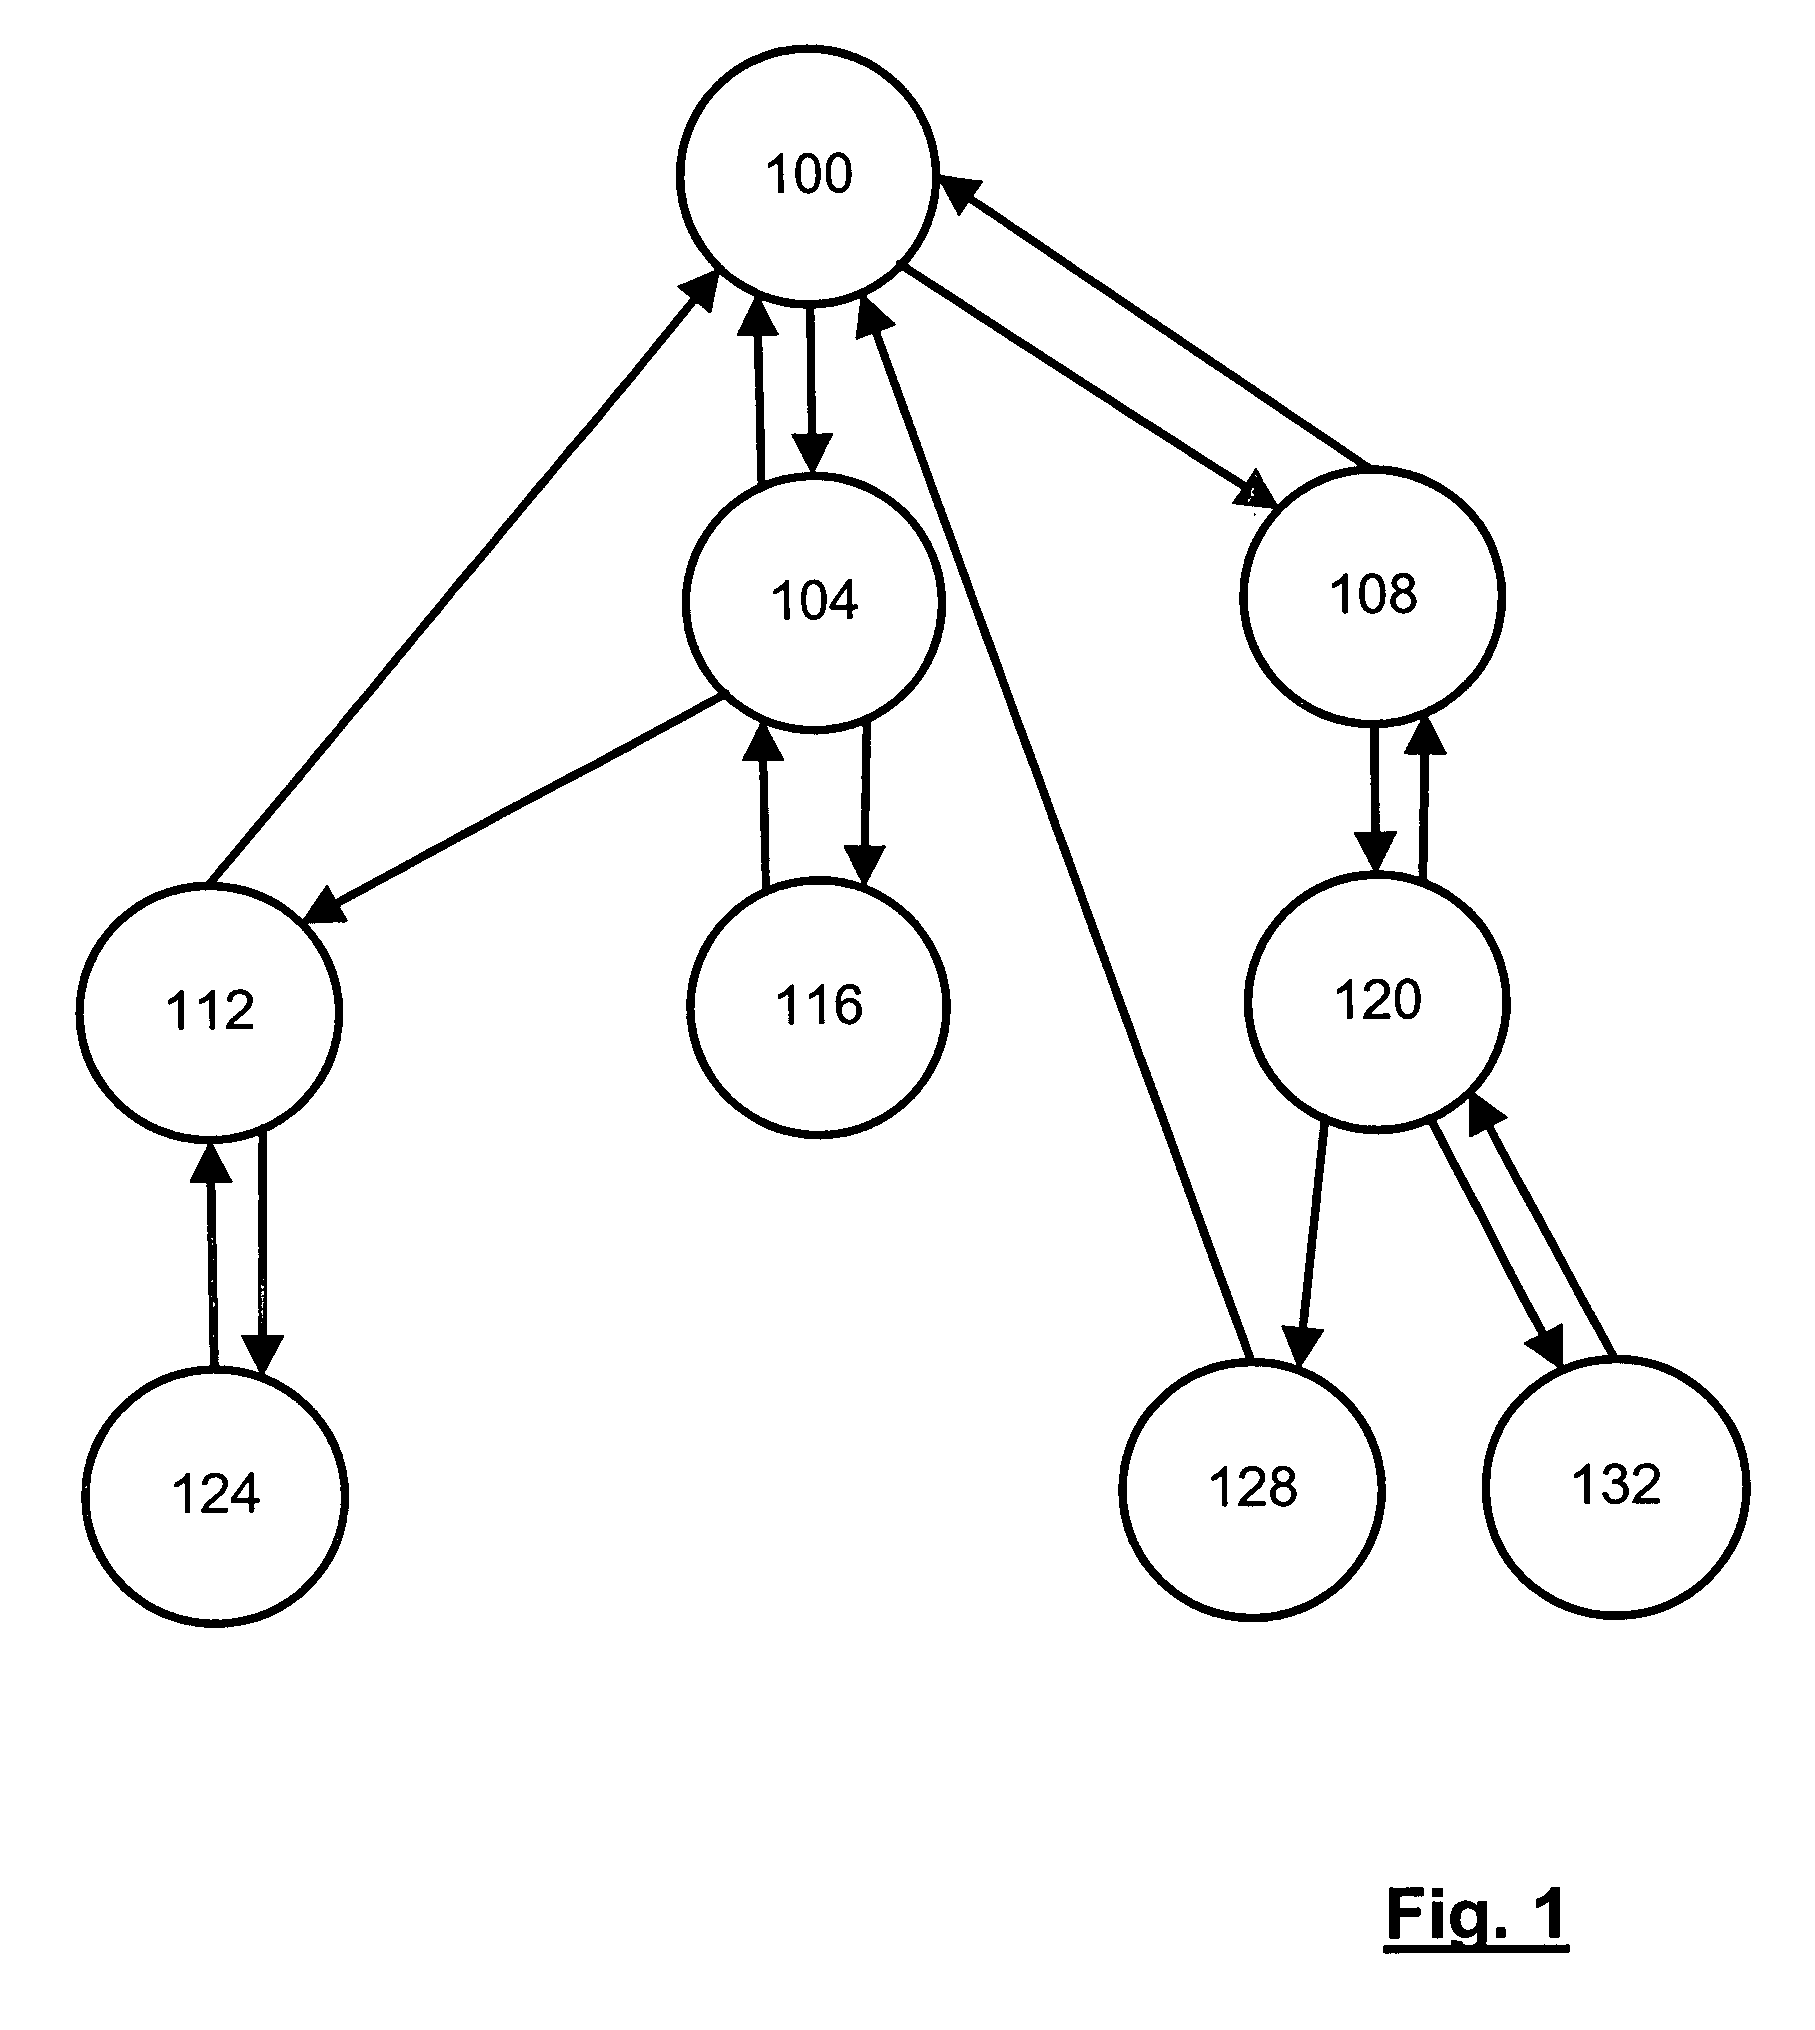 Compiler with cache utilization optimizations